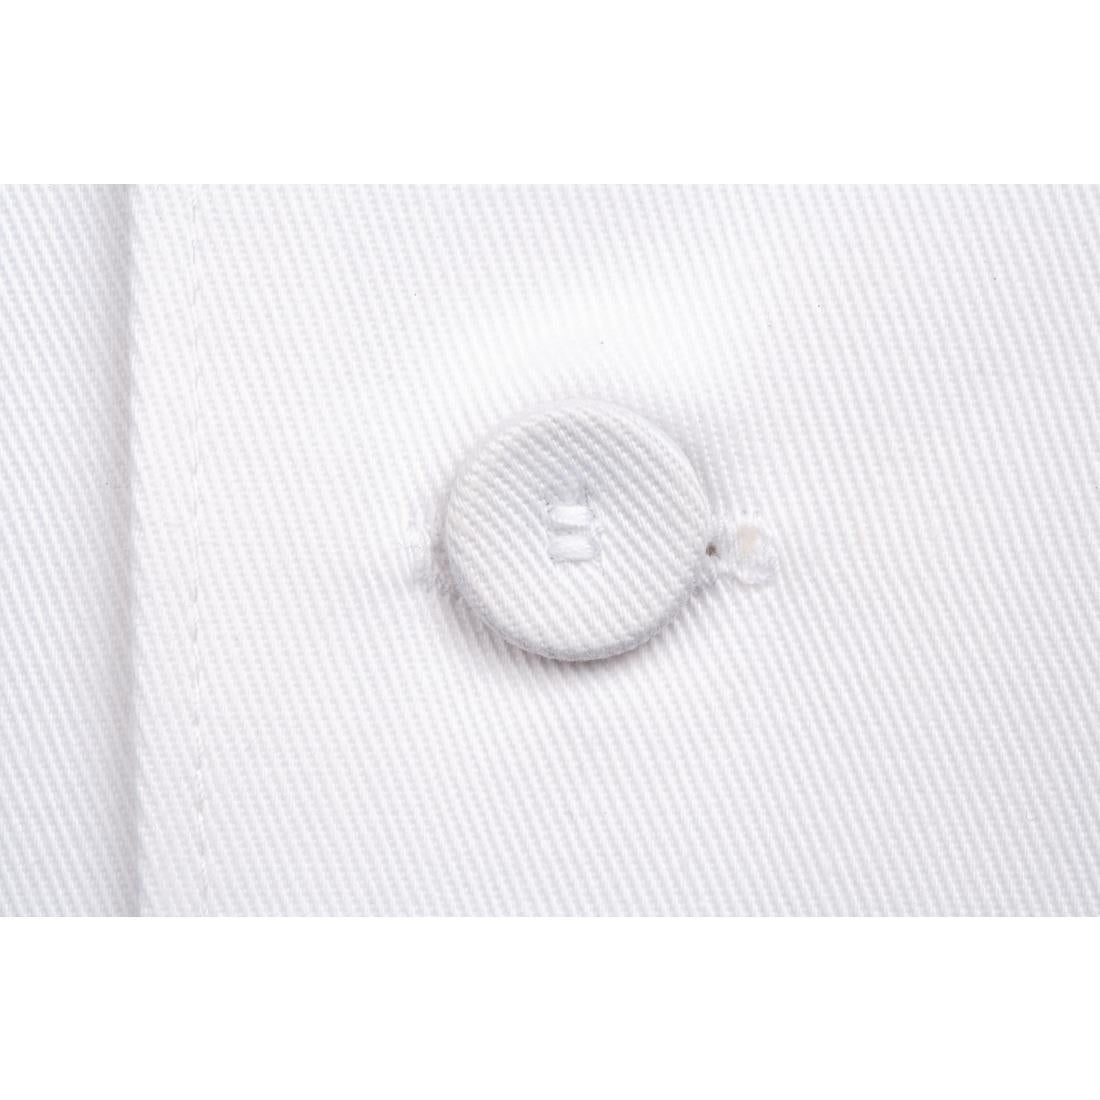 B649-L Chef Works Calgary Long Sleeve Cool Vent Unisex Chefs Jacket White L JD Catering Equipment Solutions Ltd